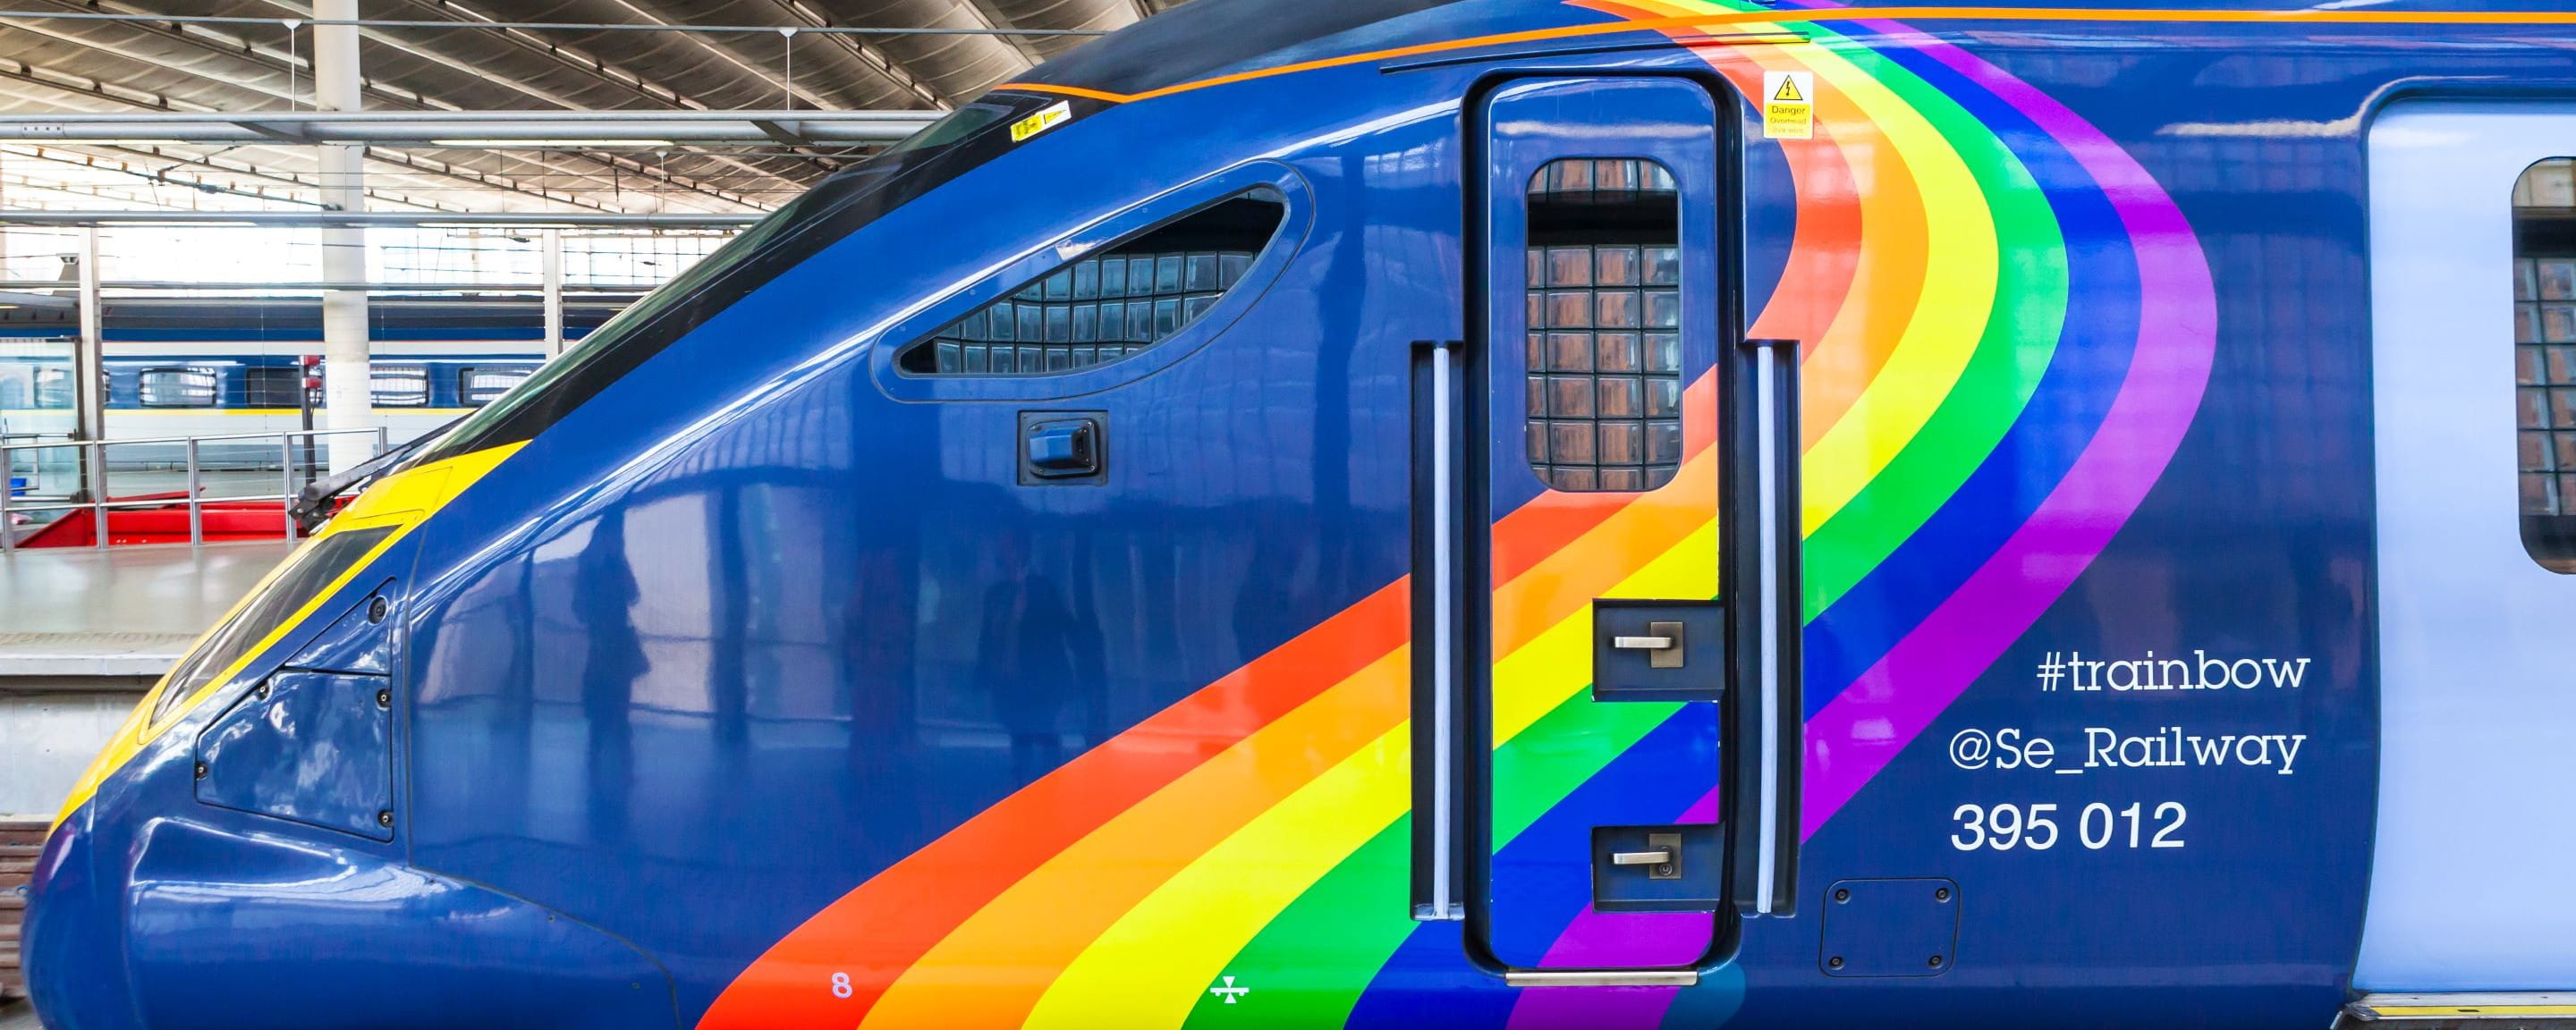 Blue train with rainbow painted on